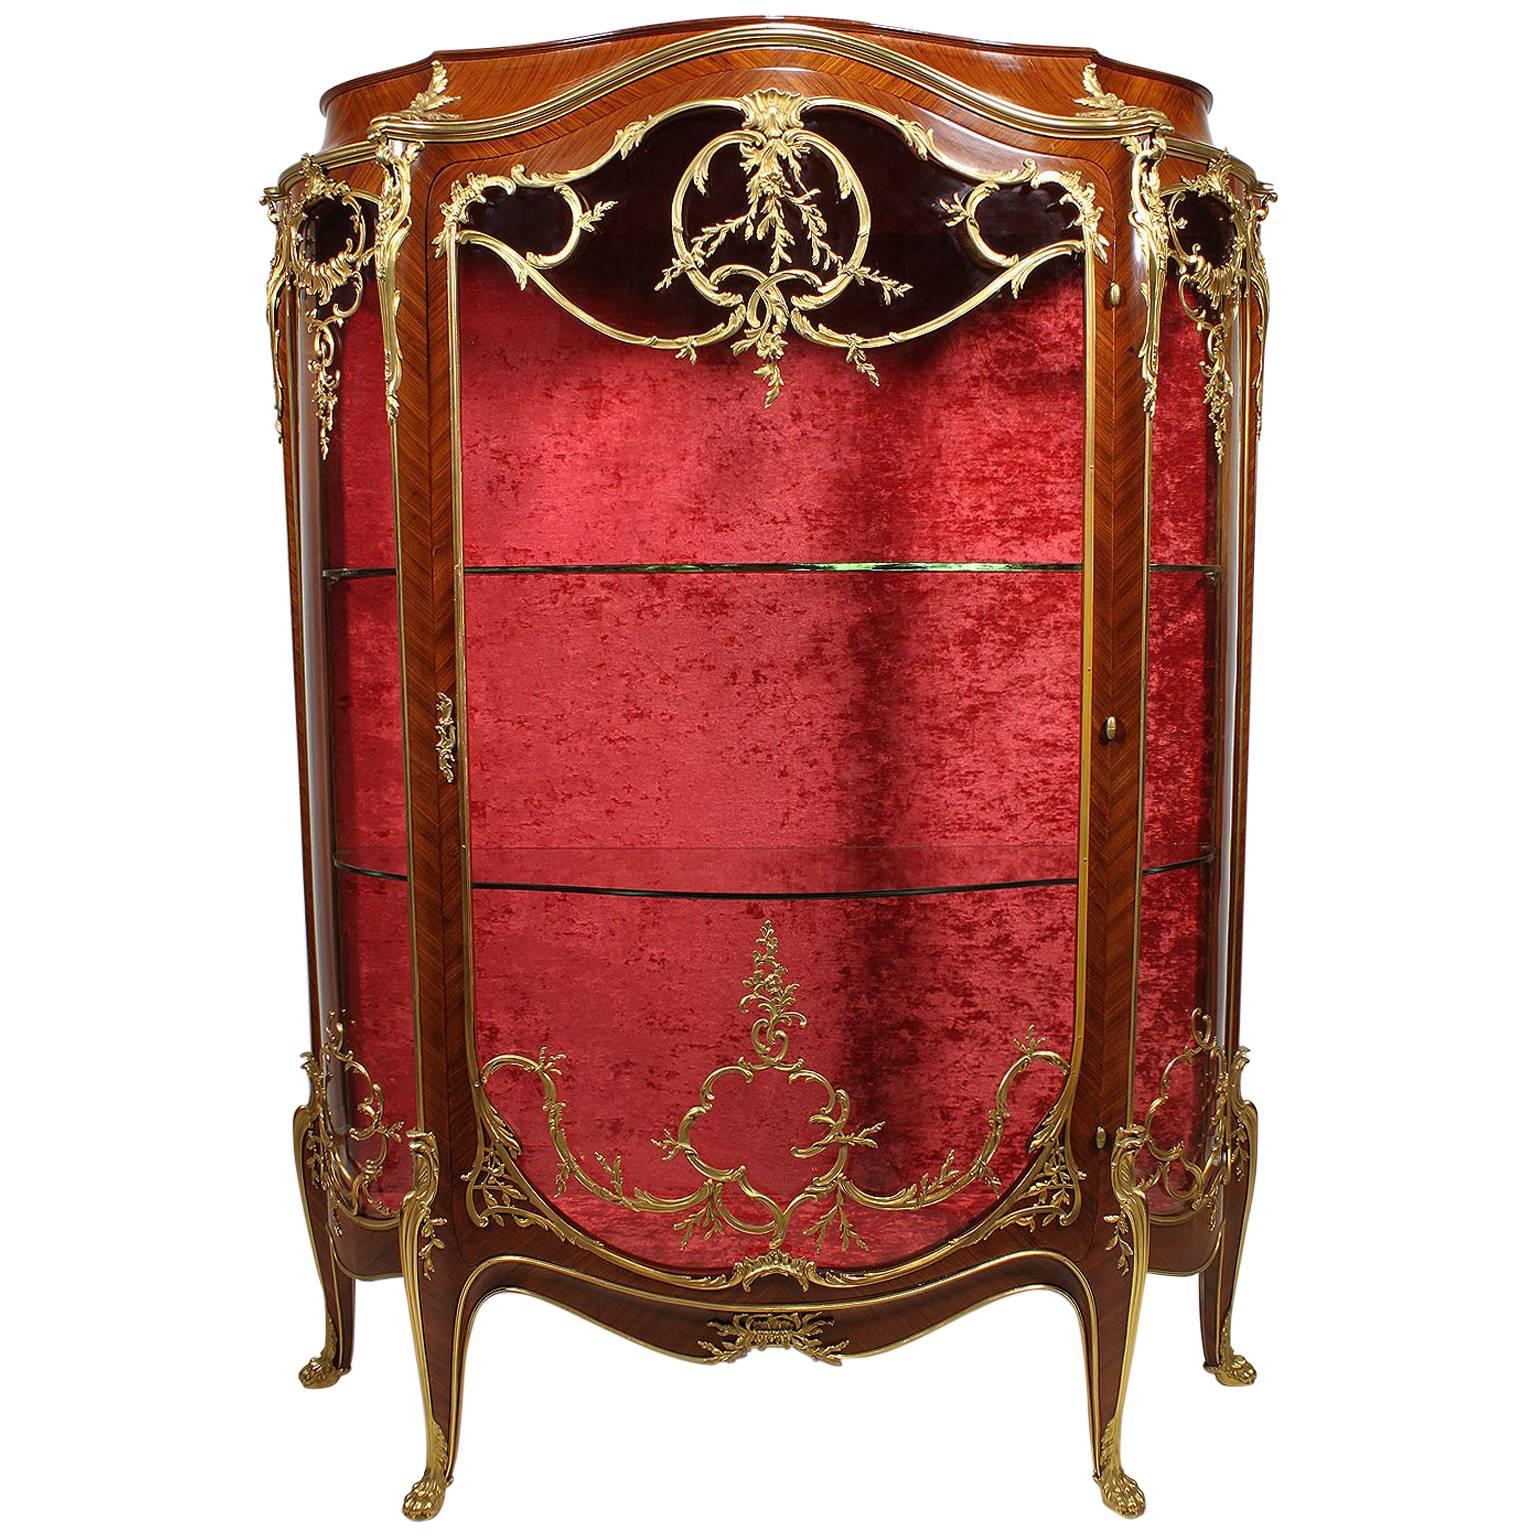 French 19th-20th Century Louis XV Style Kingwood and Ormolu Mounted Vitrine